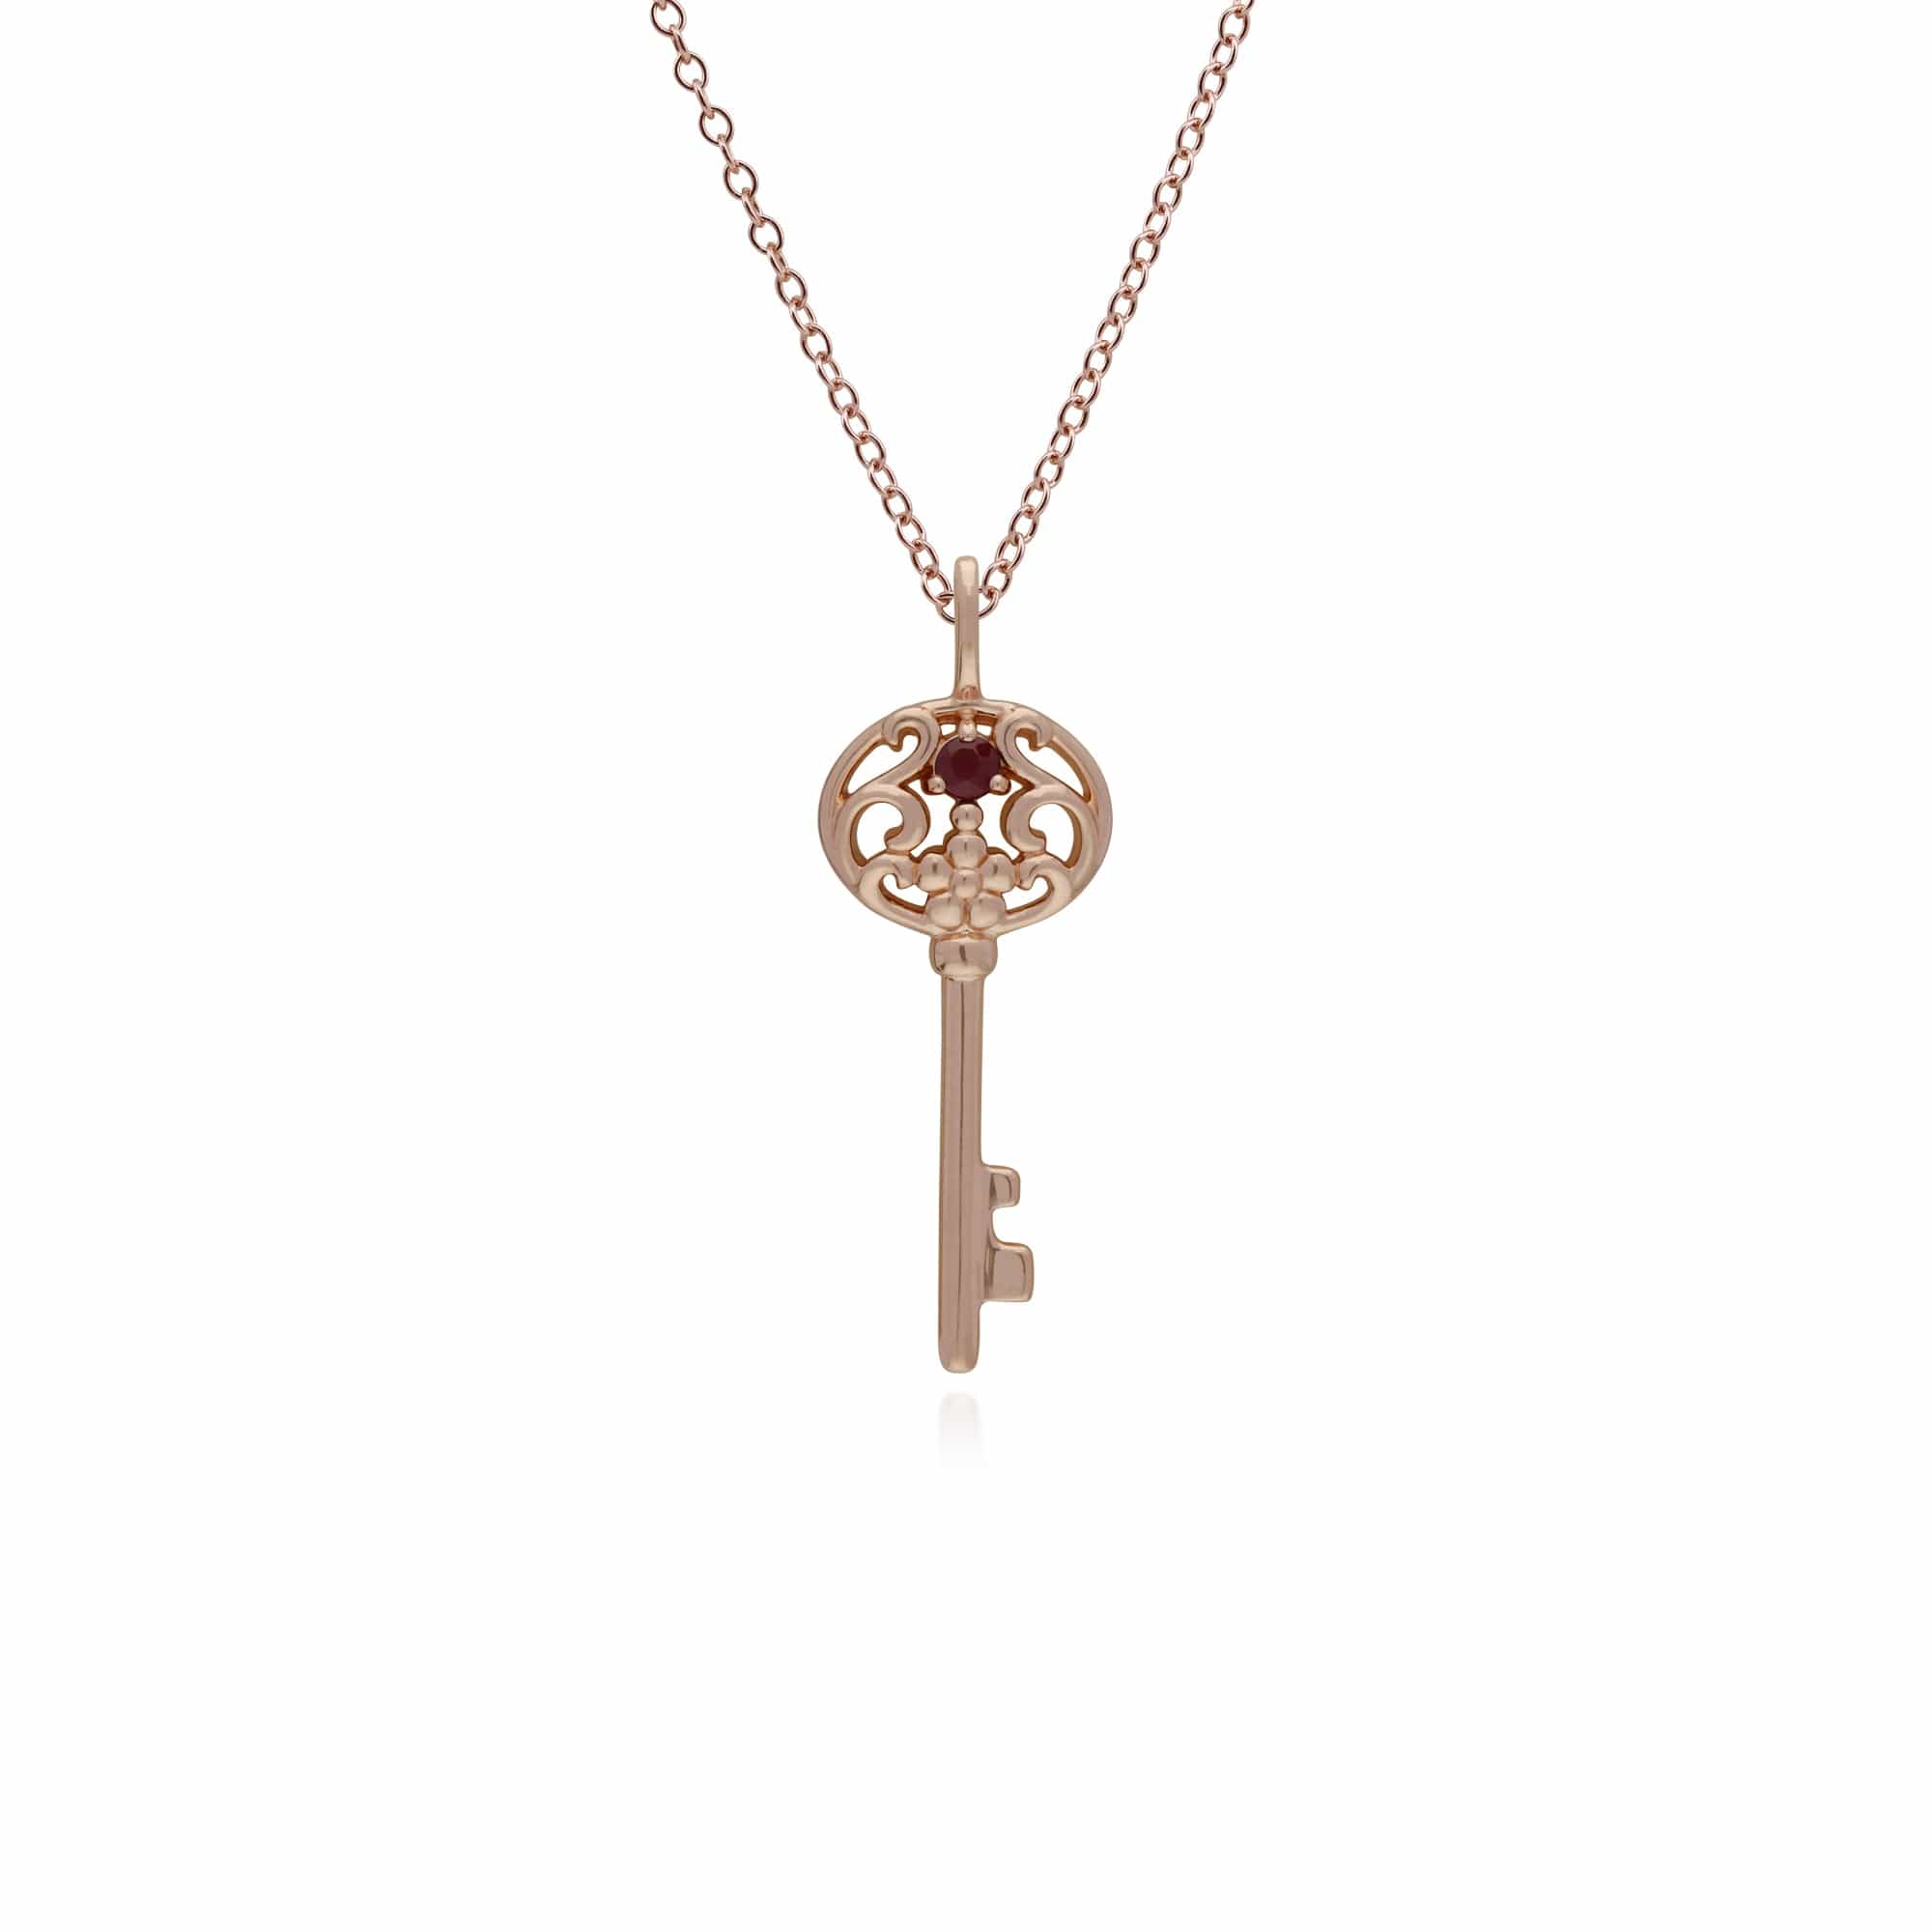 270P026703925-270P026901925 Classic Heart Lock Pendant & Ruby Big Key Charm in Rose Gold Plated 925 Sterling Silver 2